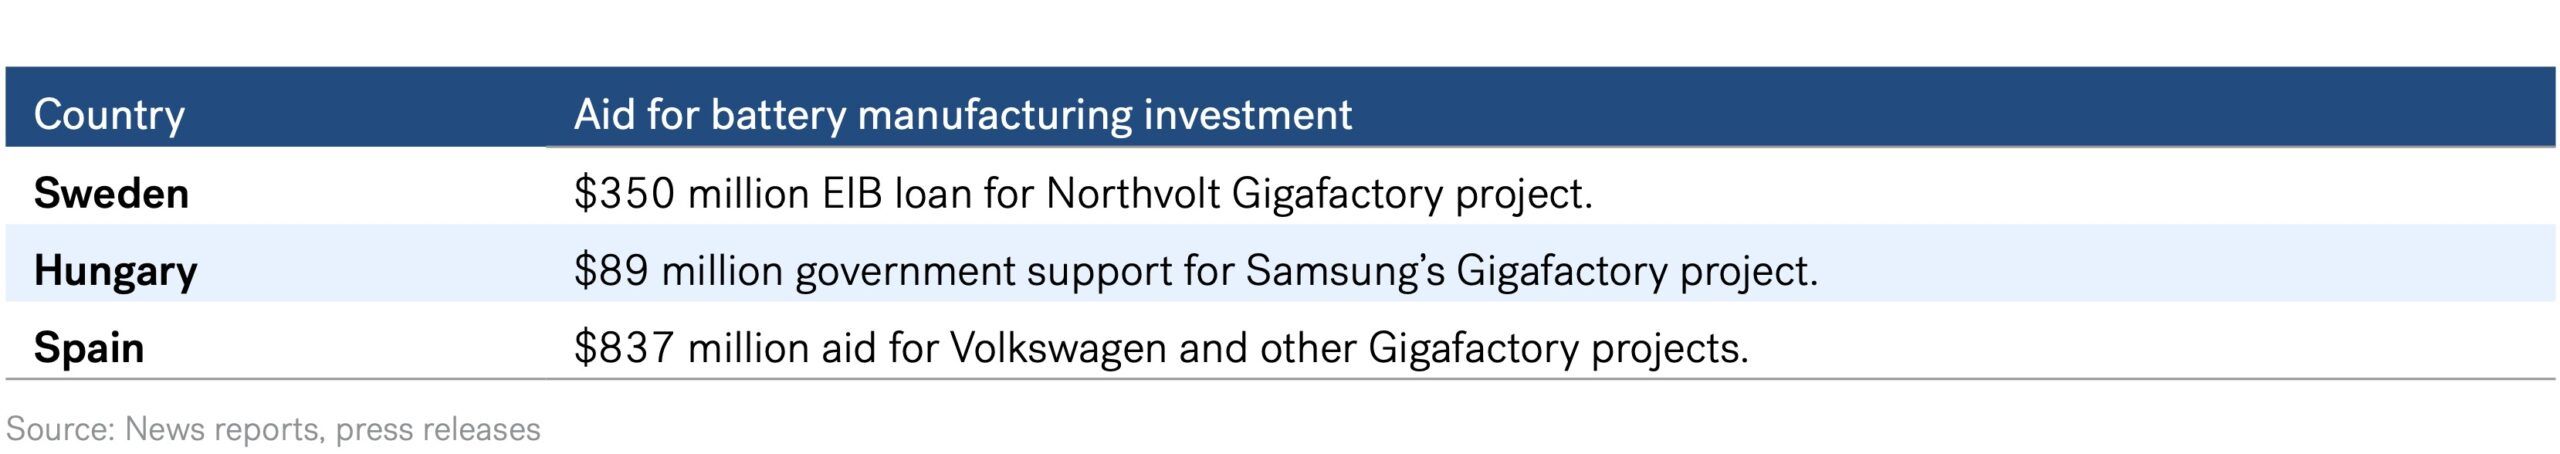 Gigafactory - EU’s Approved Member States’ Aid for Battery Manufacturing Investment